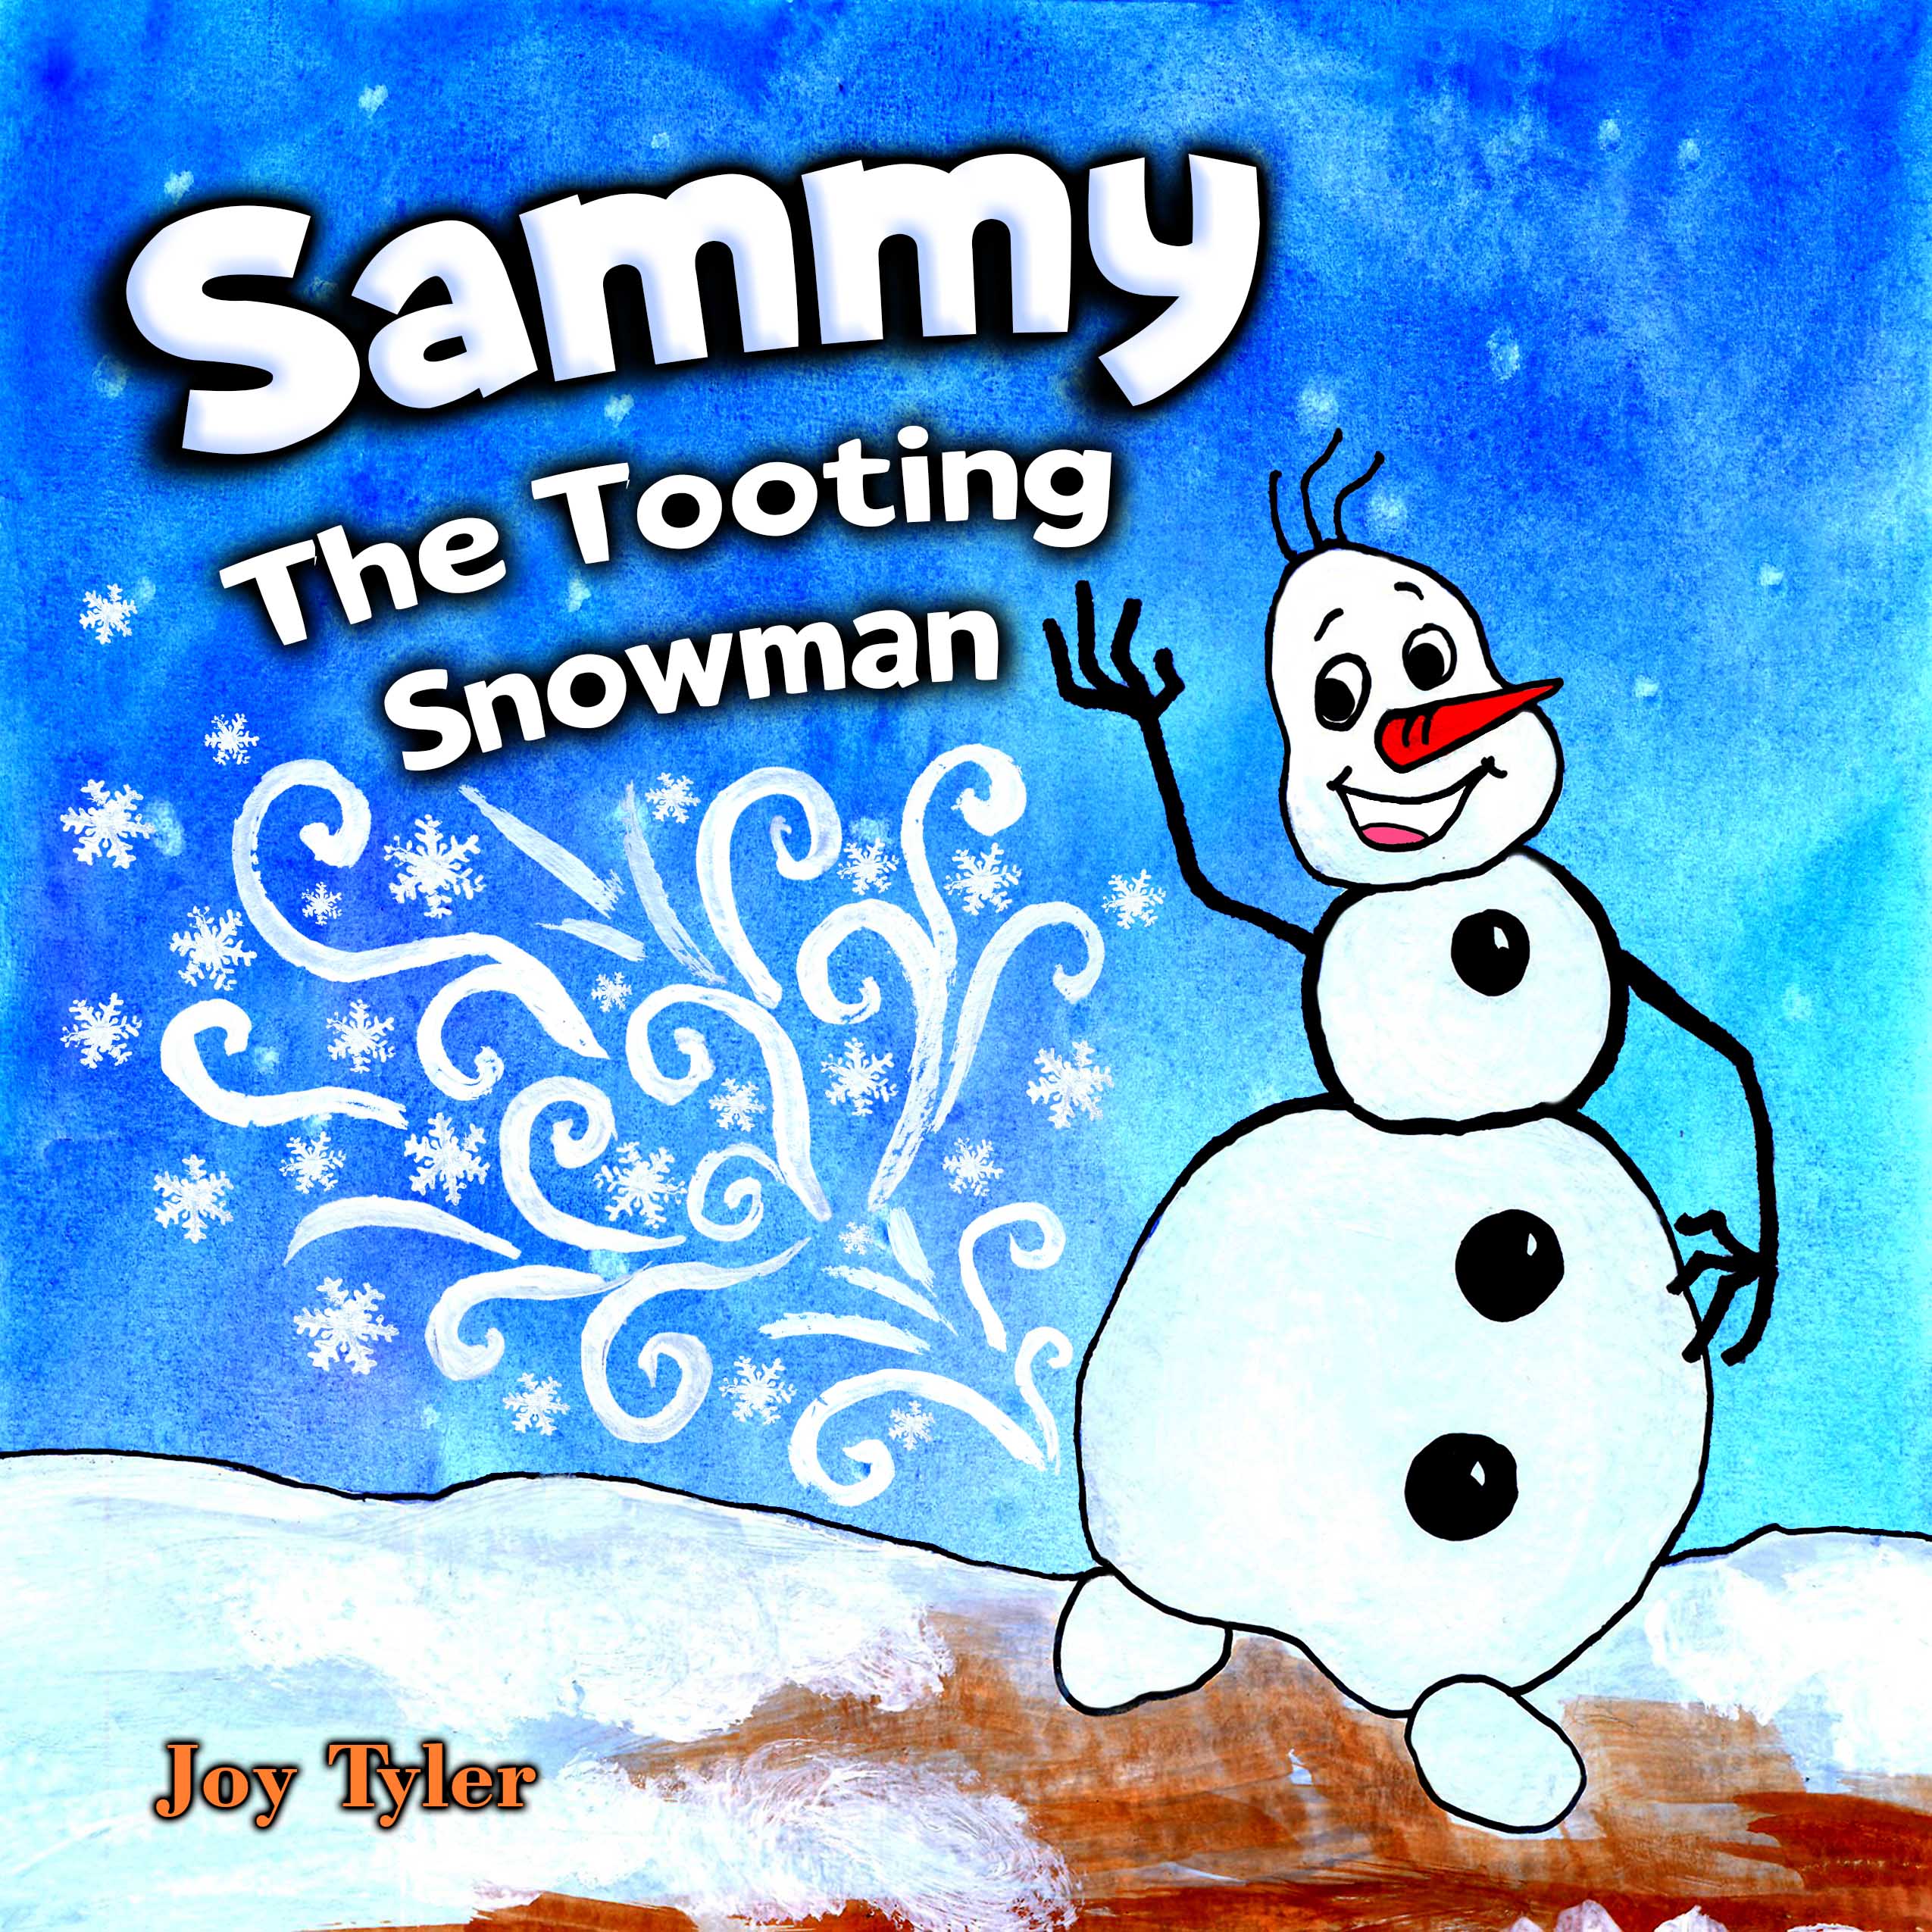 Sammy The Tooting Snowman: A Funny Christmas Book For Kids About A Farting Snowman Who Helps Santa